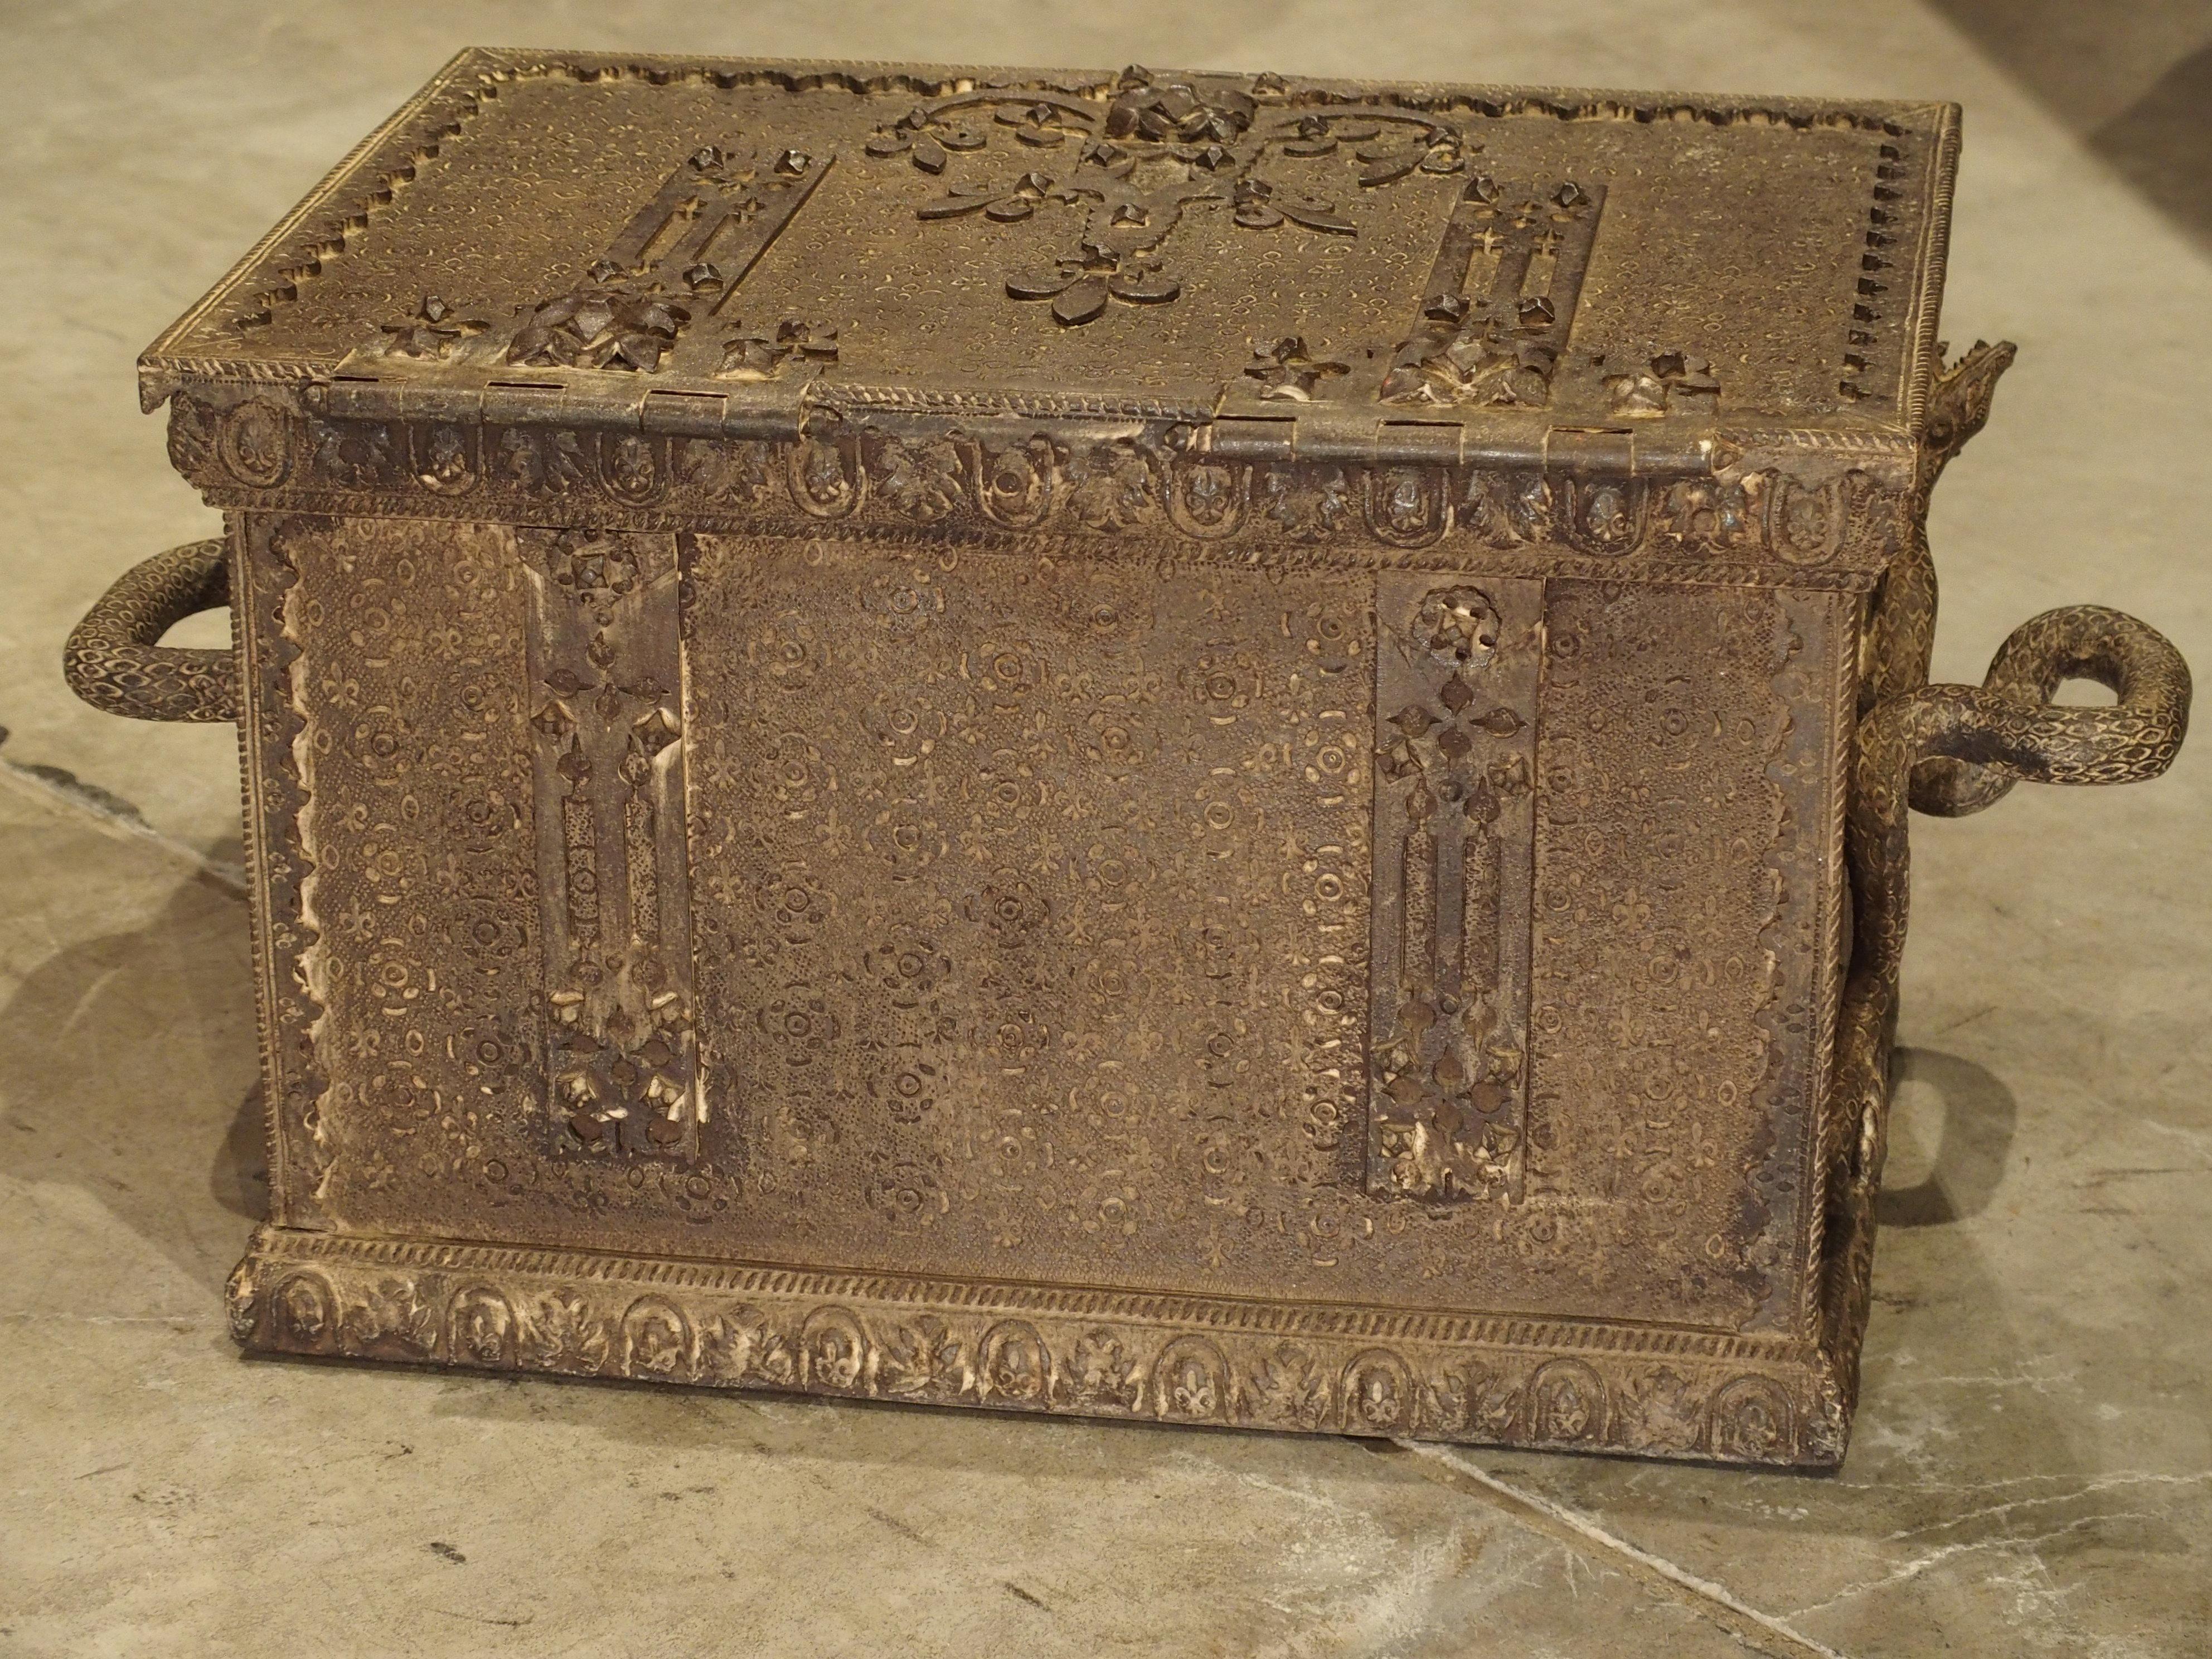 From France, this highly detailed and unusual iron and velvet lined strongbox has been stamped with multiple types of fleur de lys, oval motifs, stylized lily motifs and other various geometric shapes. The forged iron hinge straps and latch plates